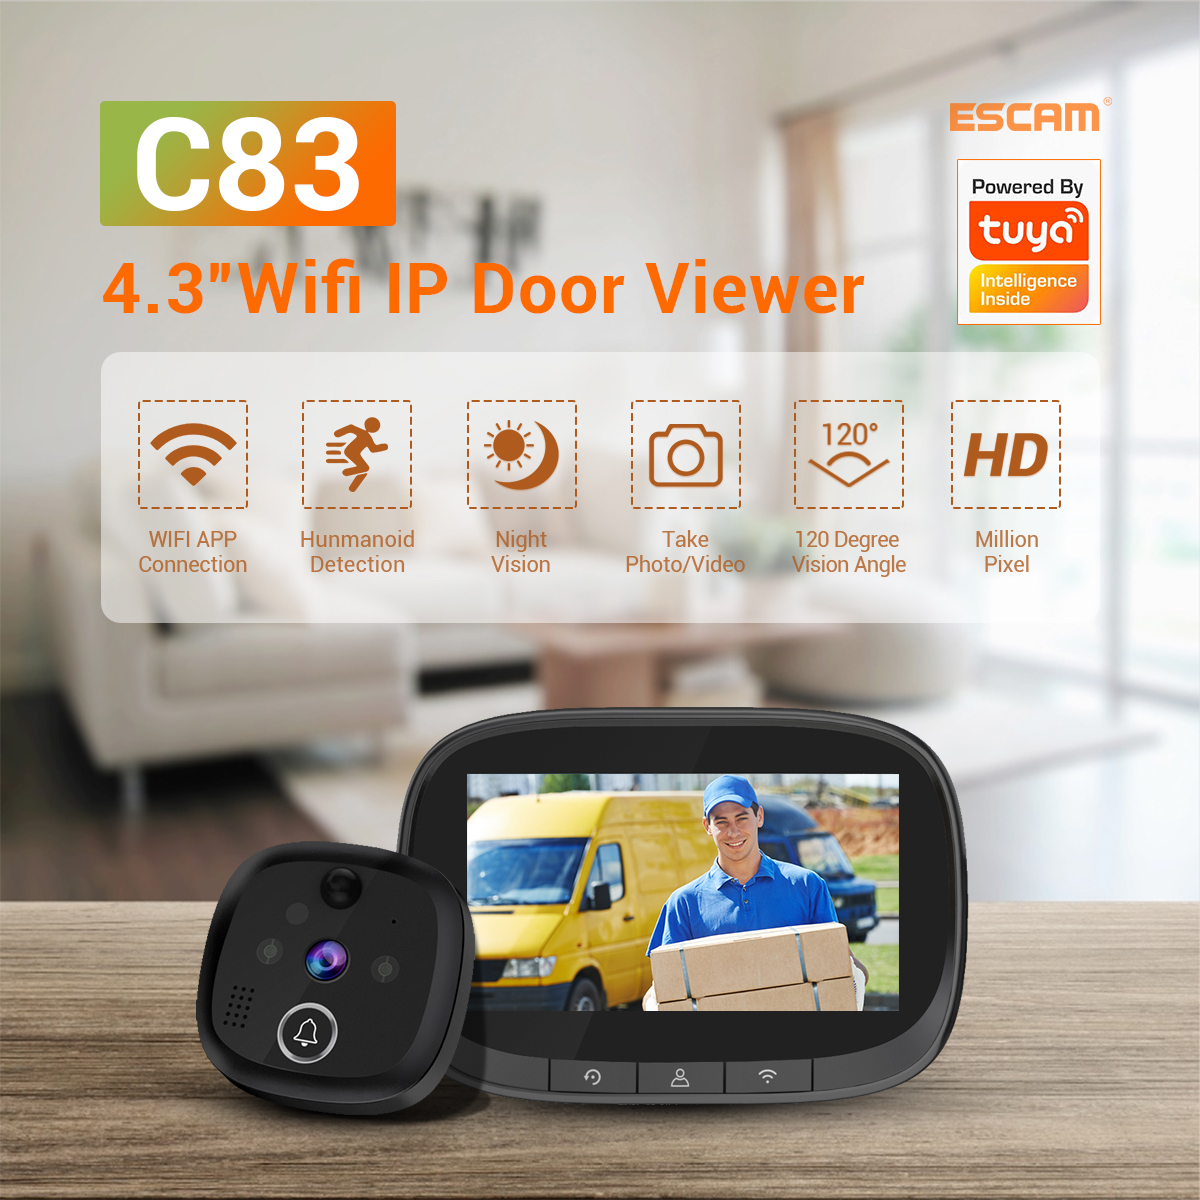 ESCAM C83 Wireless Doorbell 4.3inch WIFI IP Door Viewer HD Night Vision 120° can Take Photo and Video PIR Motion Detection Two Way Audio